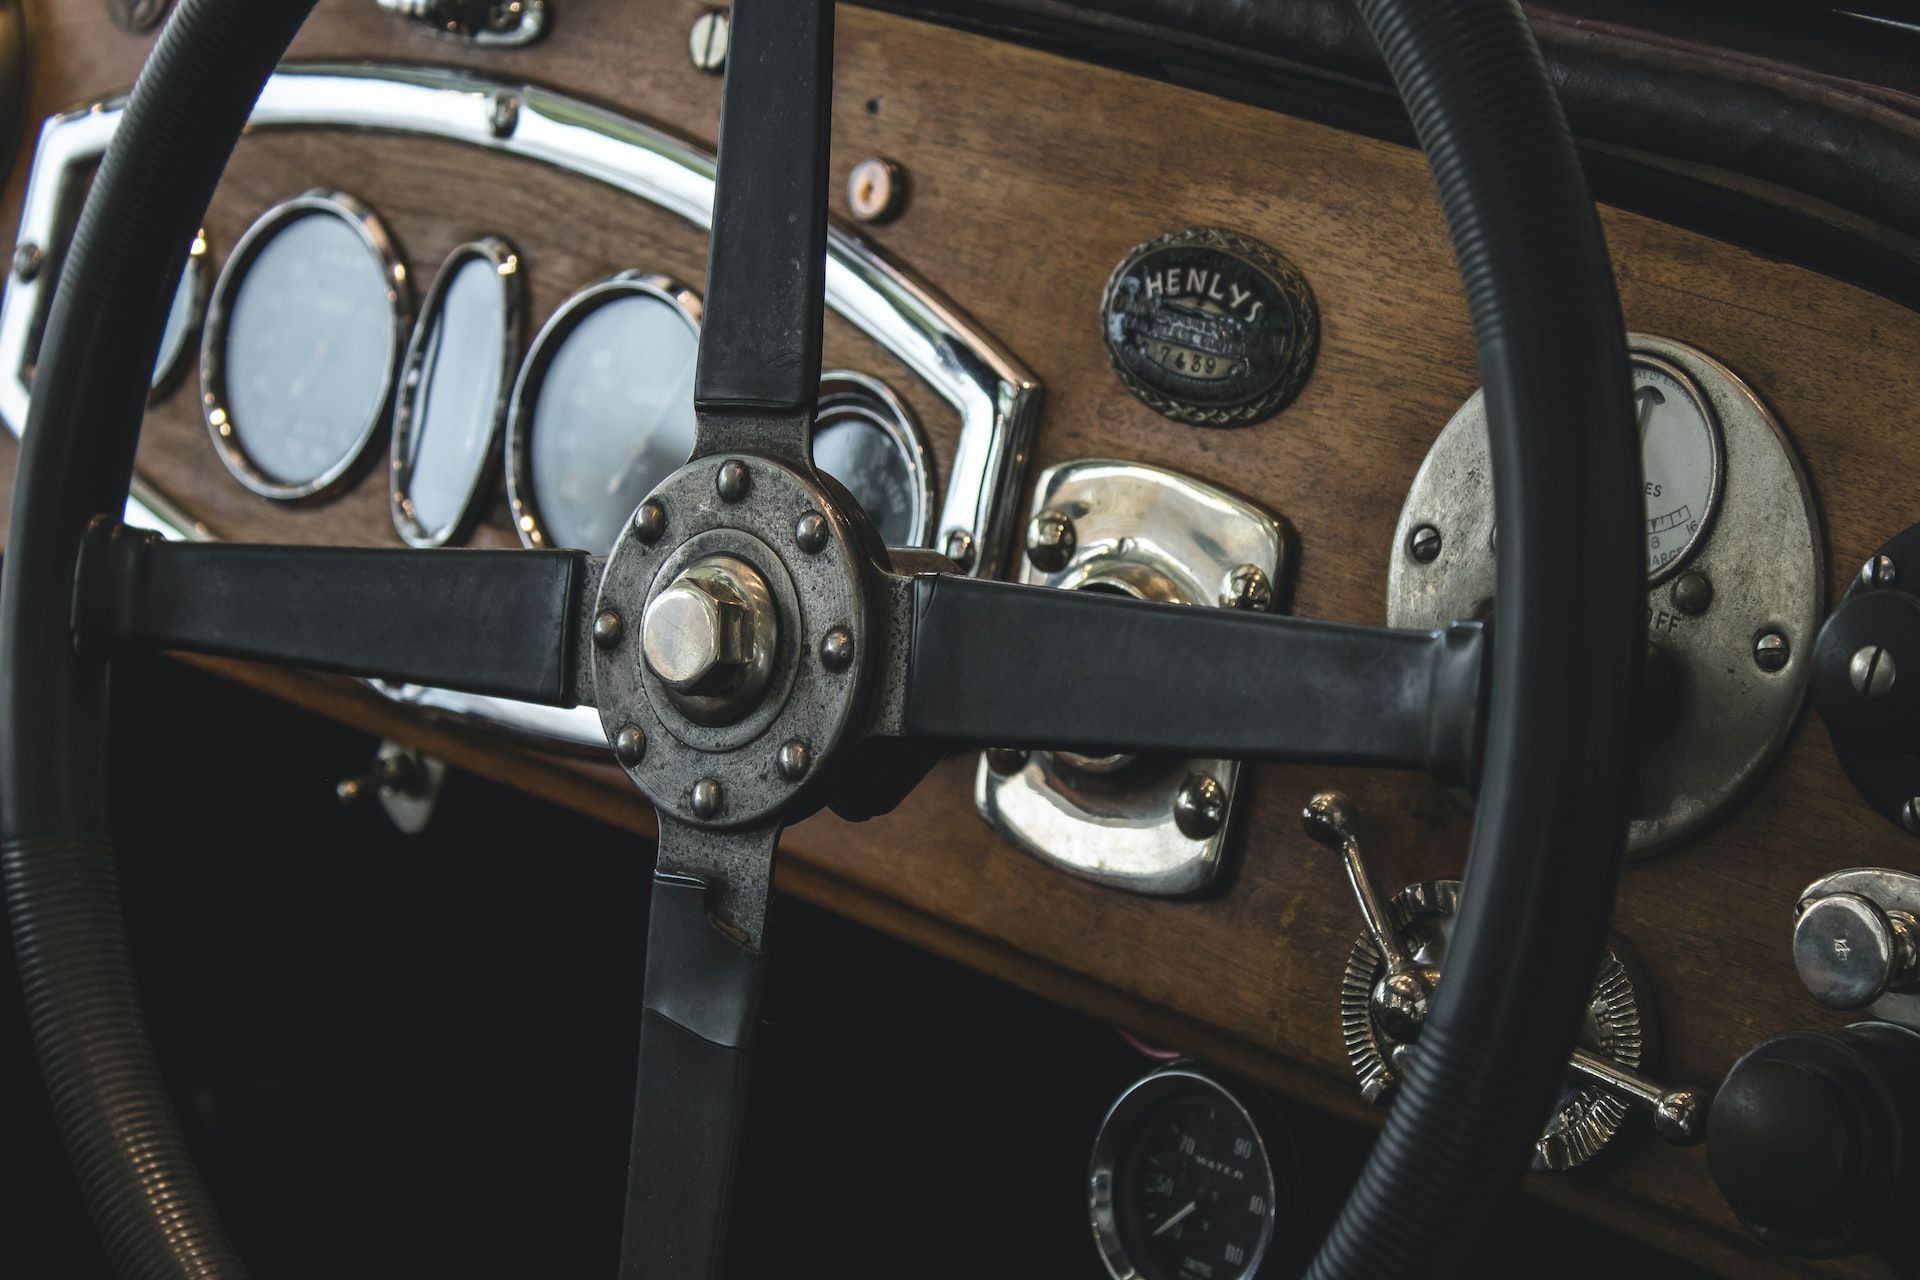 A vintage car's steering wheel and dashboard